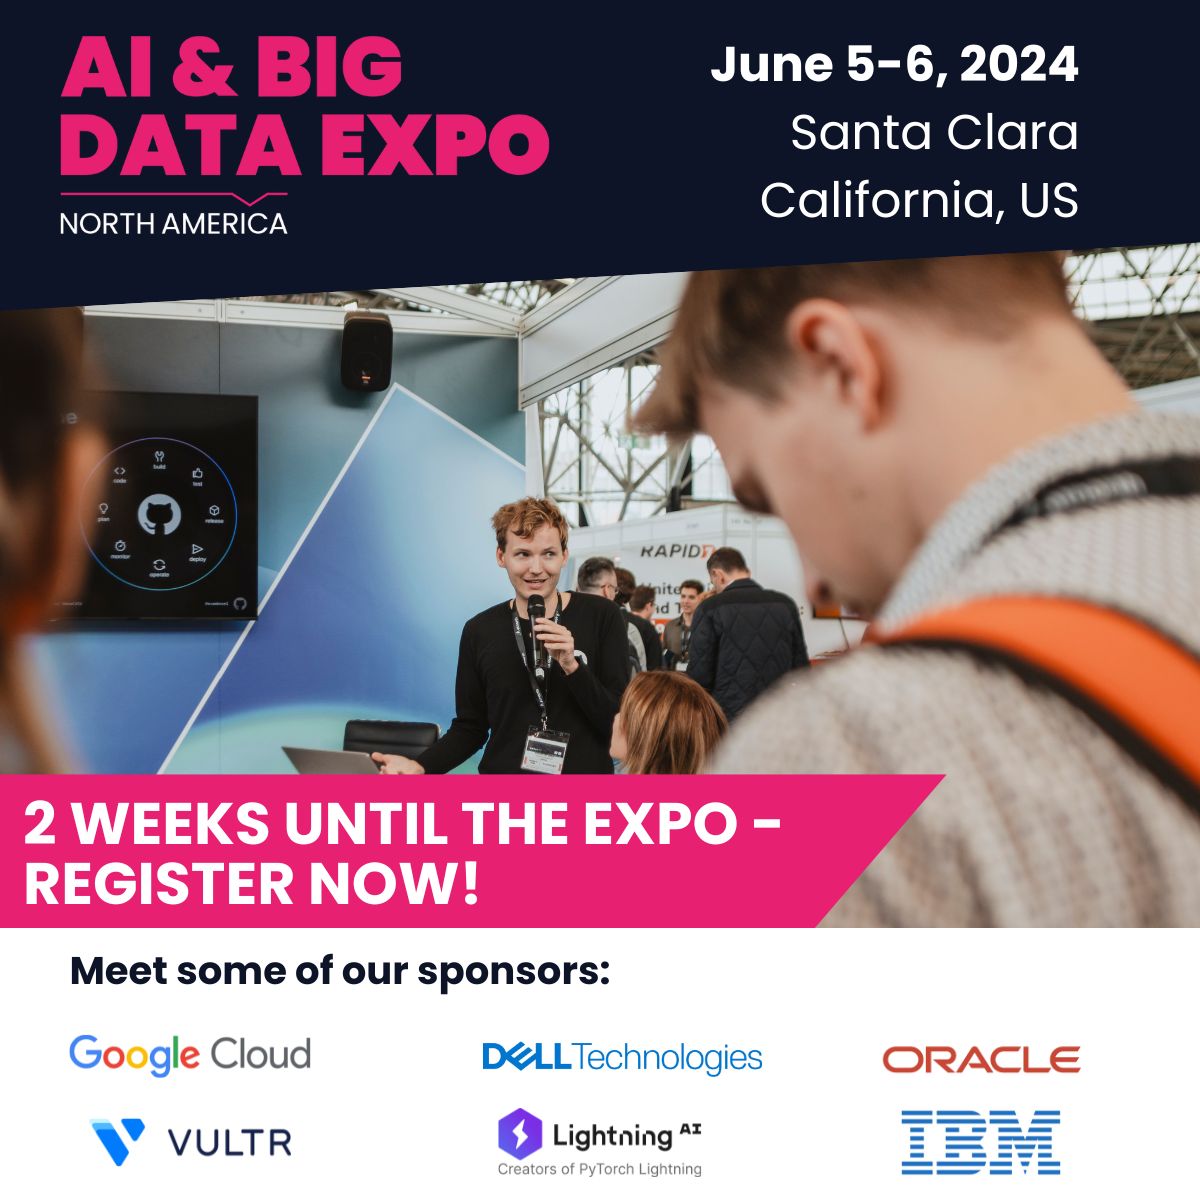 2 weeks to go! Don't miss the AI & Big Data Expo North America on June 5-6 at Santa Clara Convention Center. Register for free and join top pros, explore trends, and see exhibitors like Google Cloud, IBM, Dell and more! lnkd.in/dMa8w2a #AI #BigData #Expo